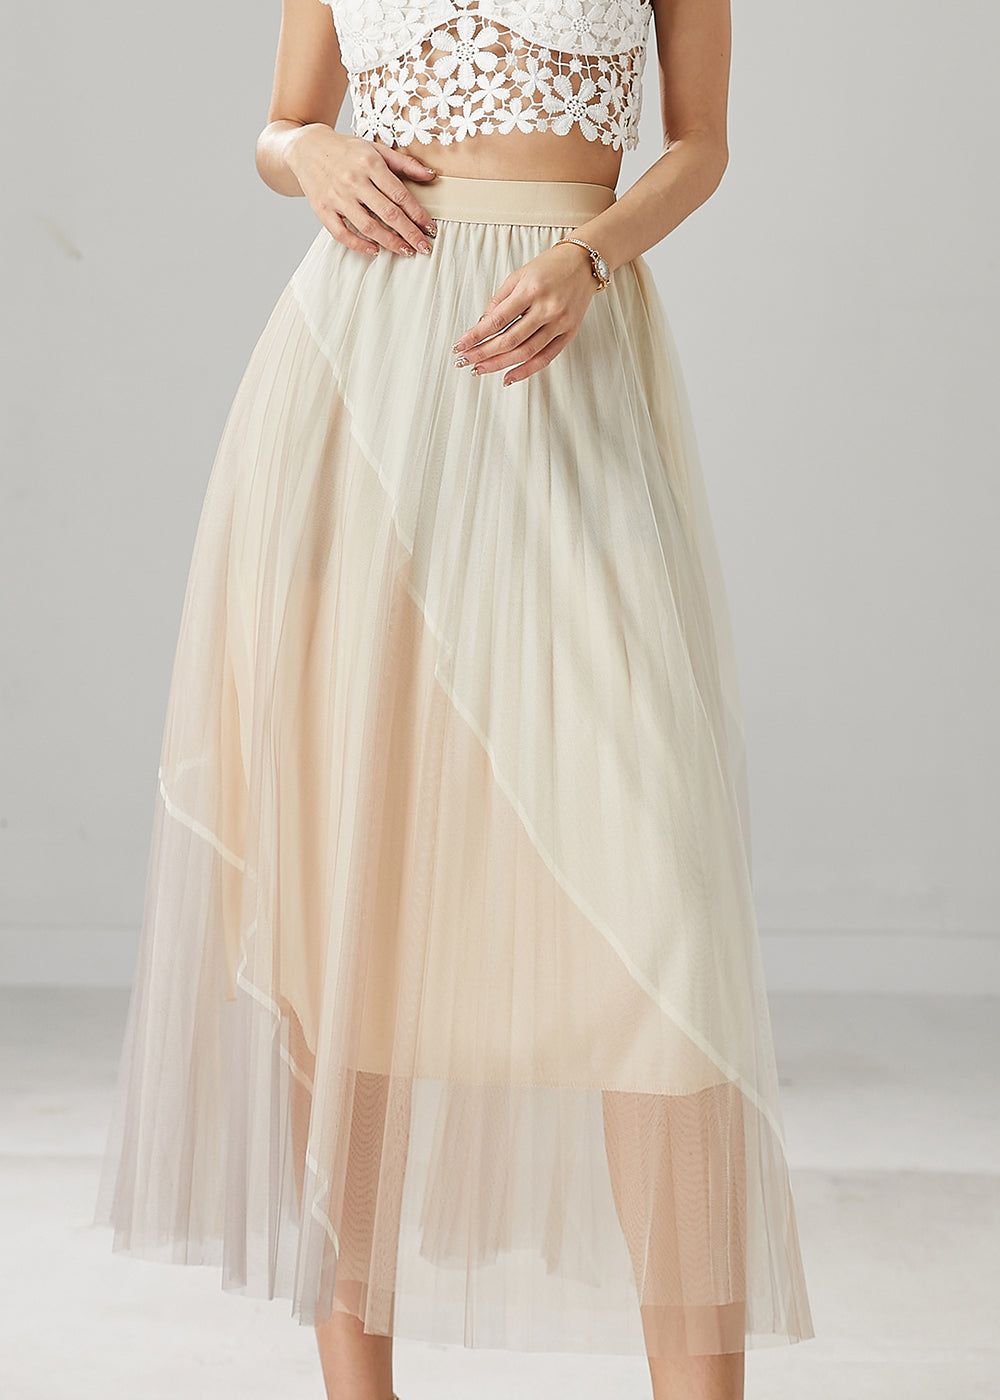 Beautiful Apricot High Waist Patchwork Tulle Skirts Summer